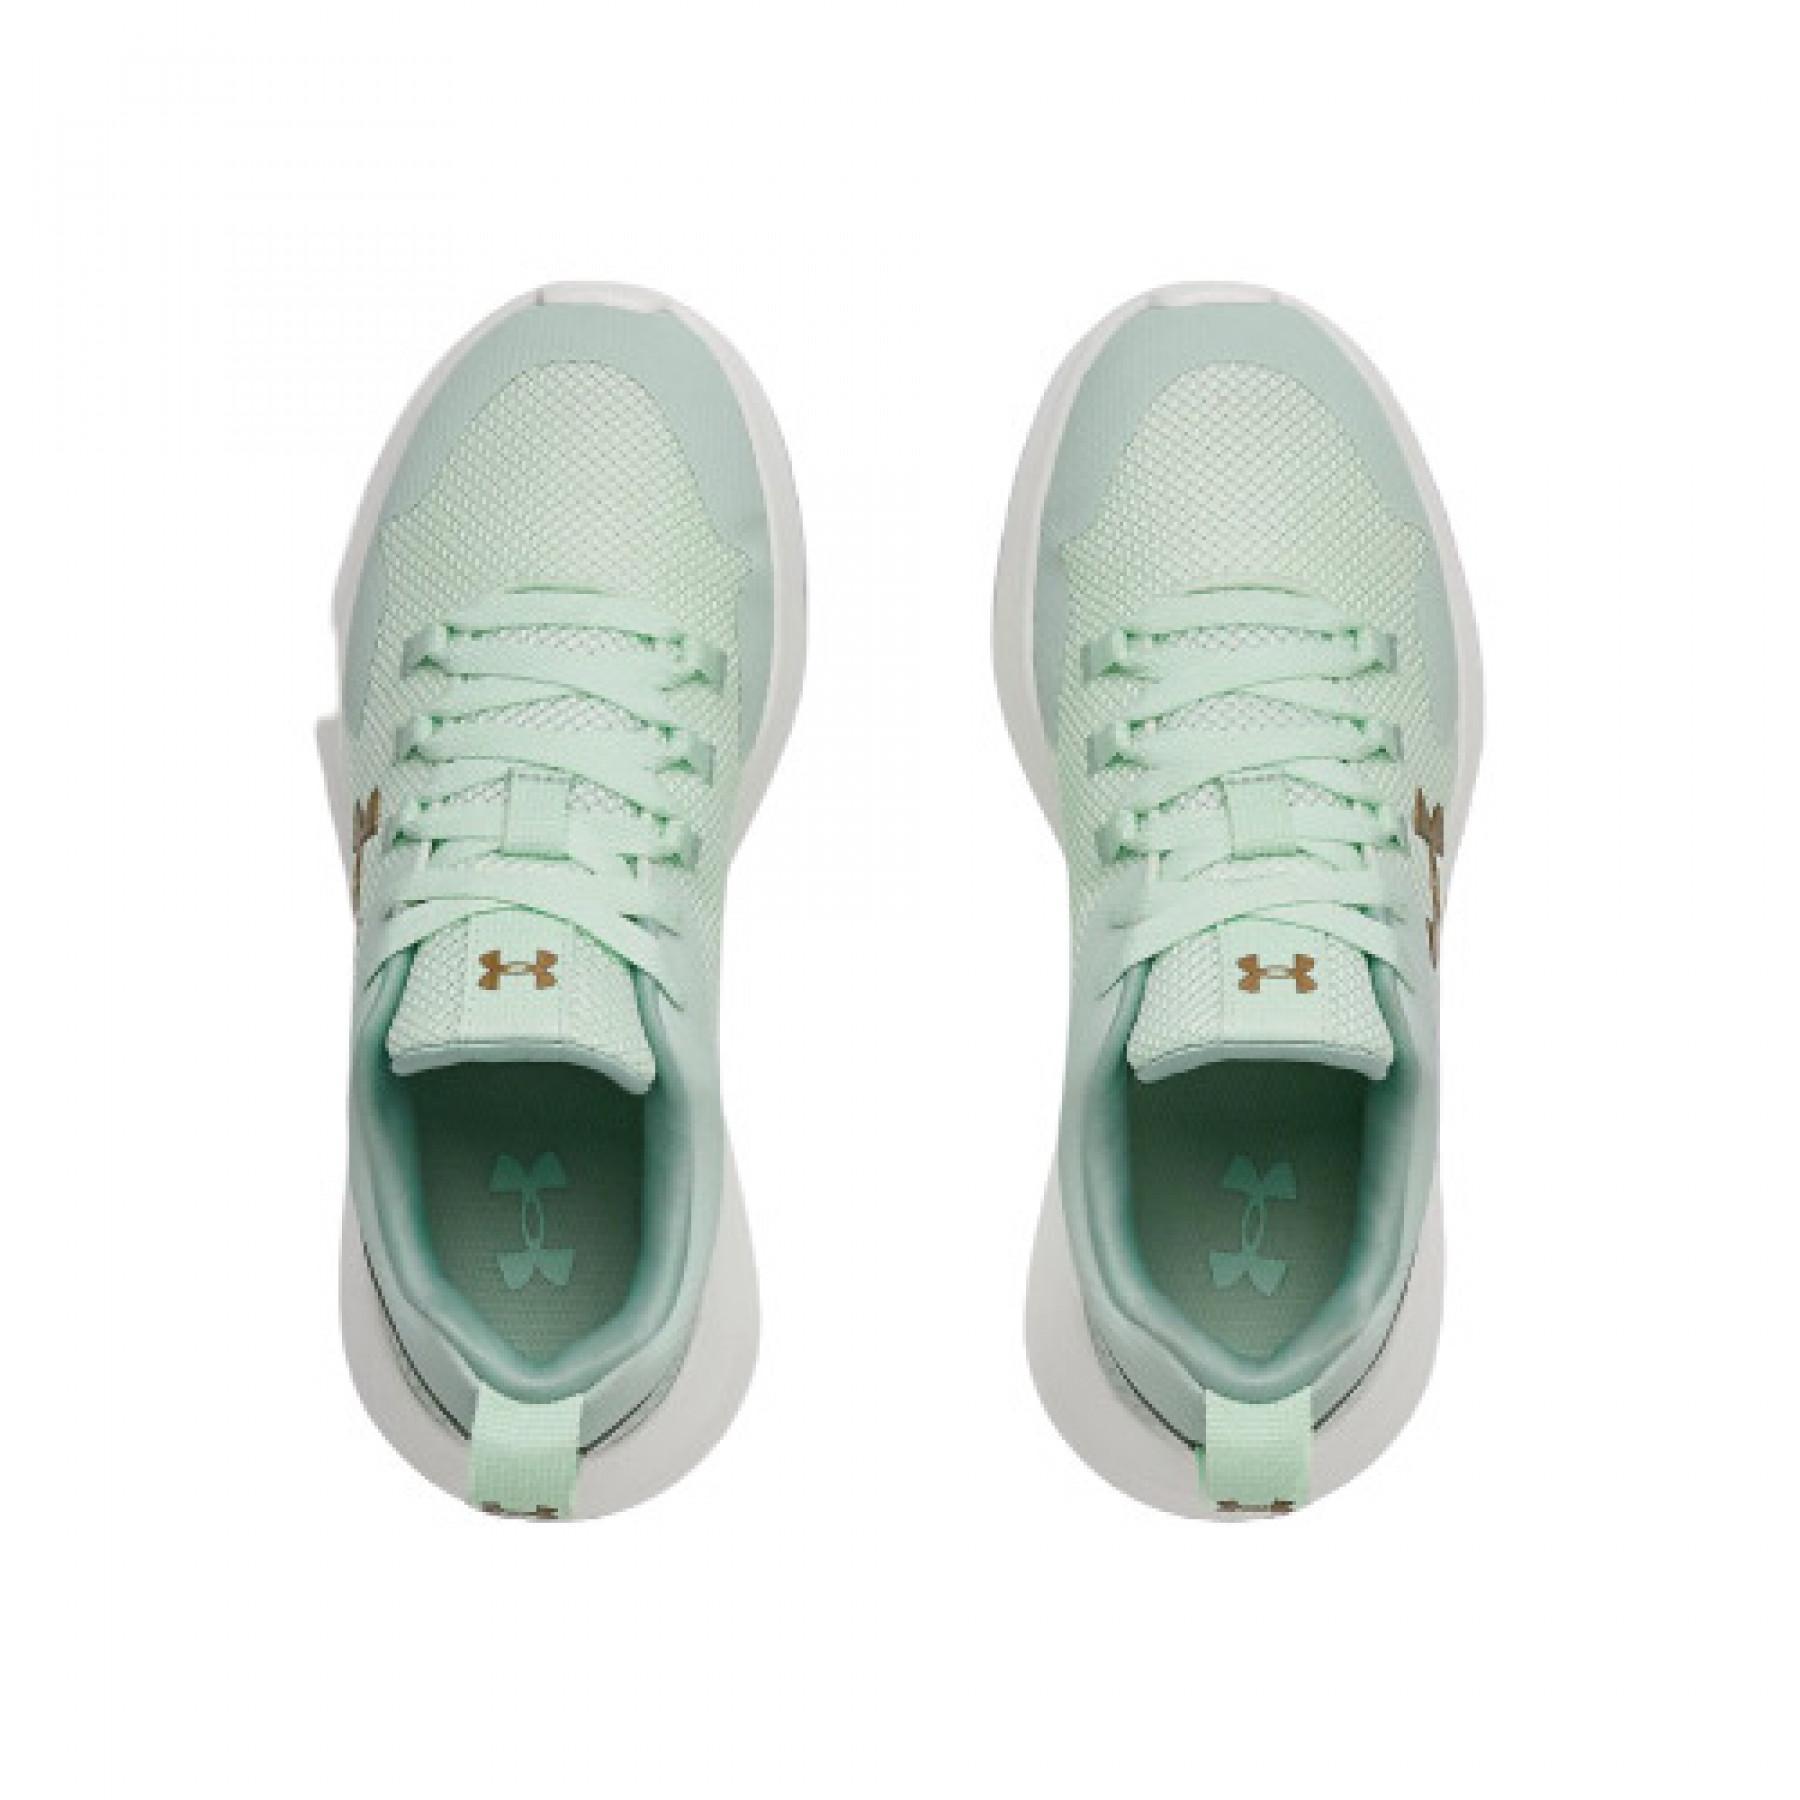 Women's sneakers Under Armour Essential